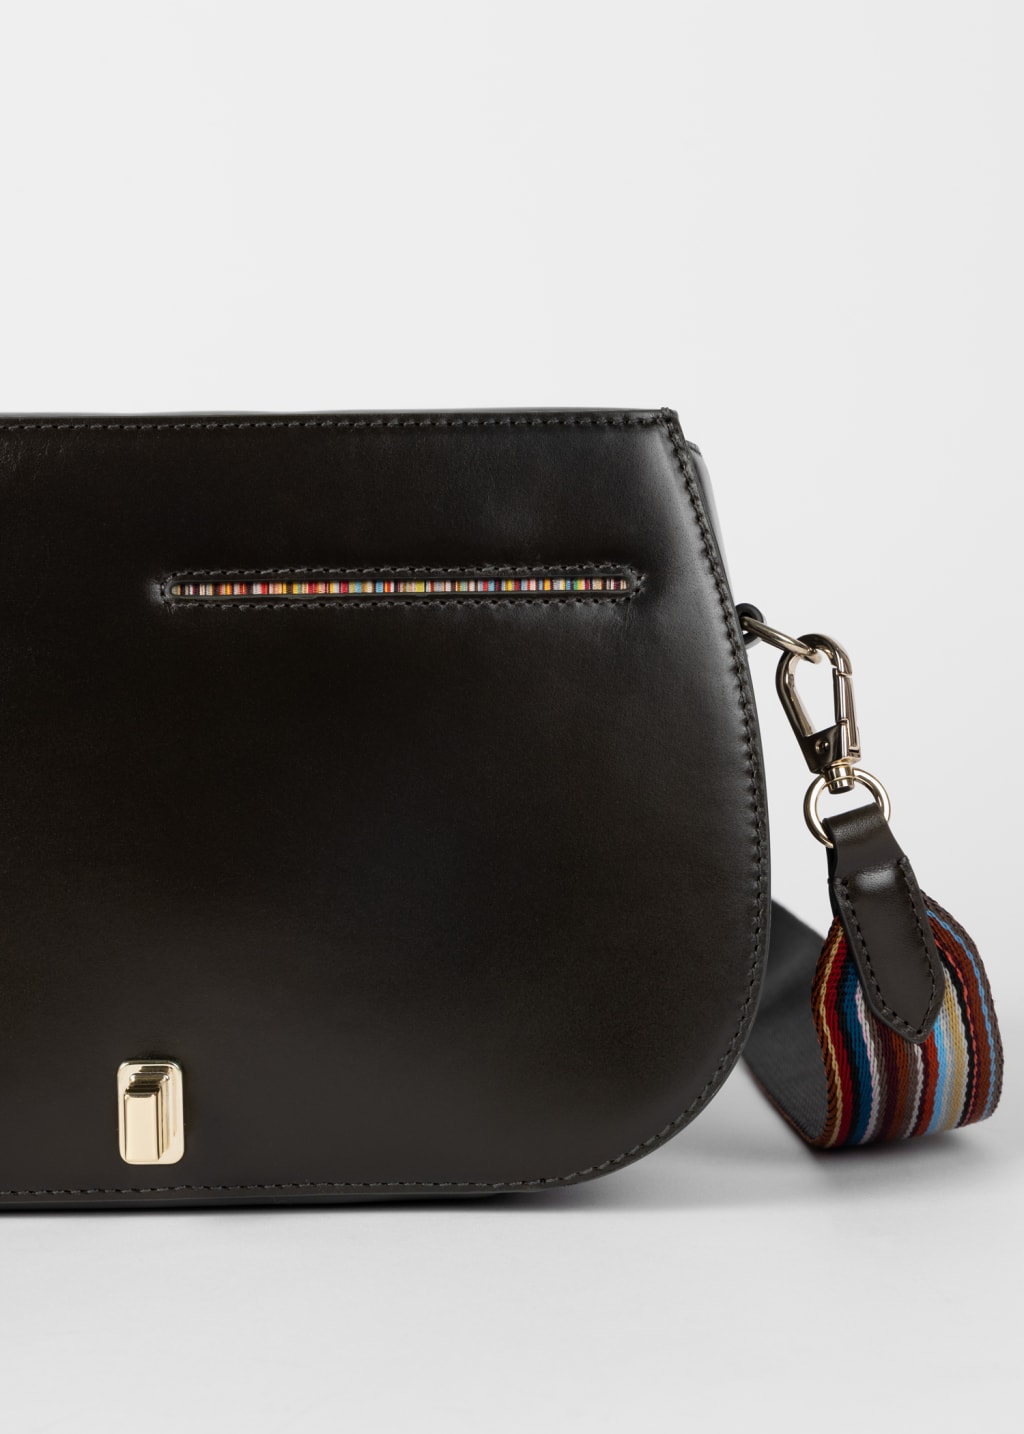 Product View - Women's Dark Green Leather Tear Drop Bag by Paul Smith